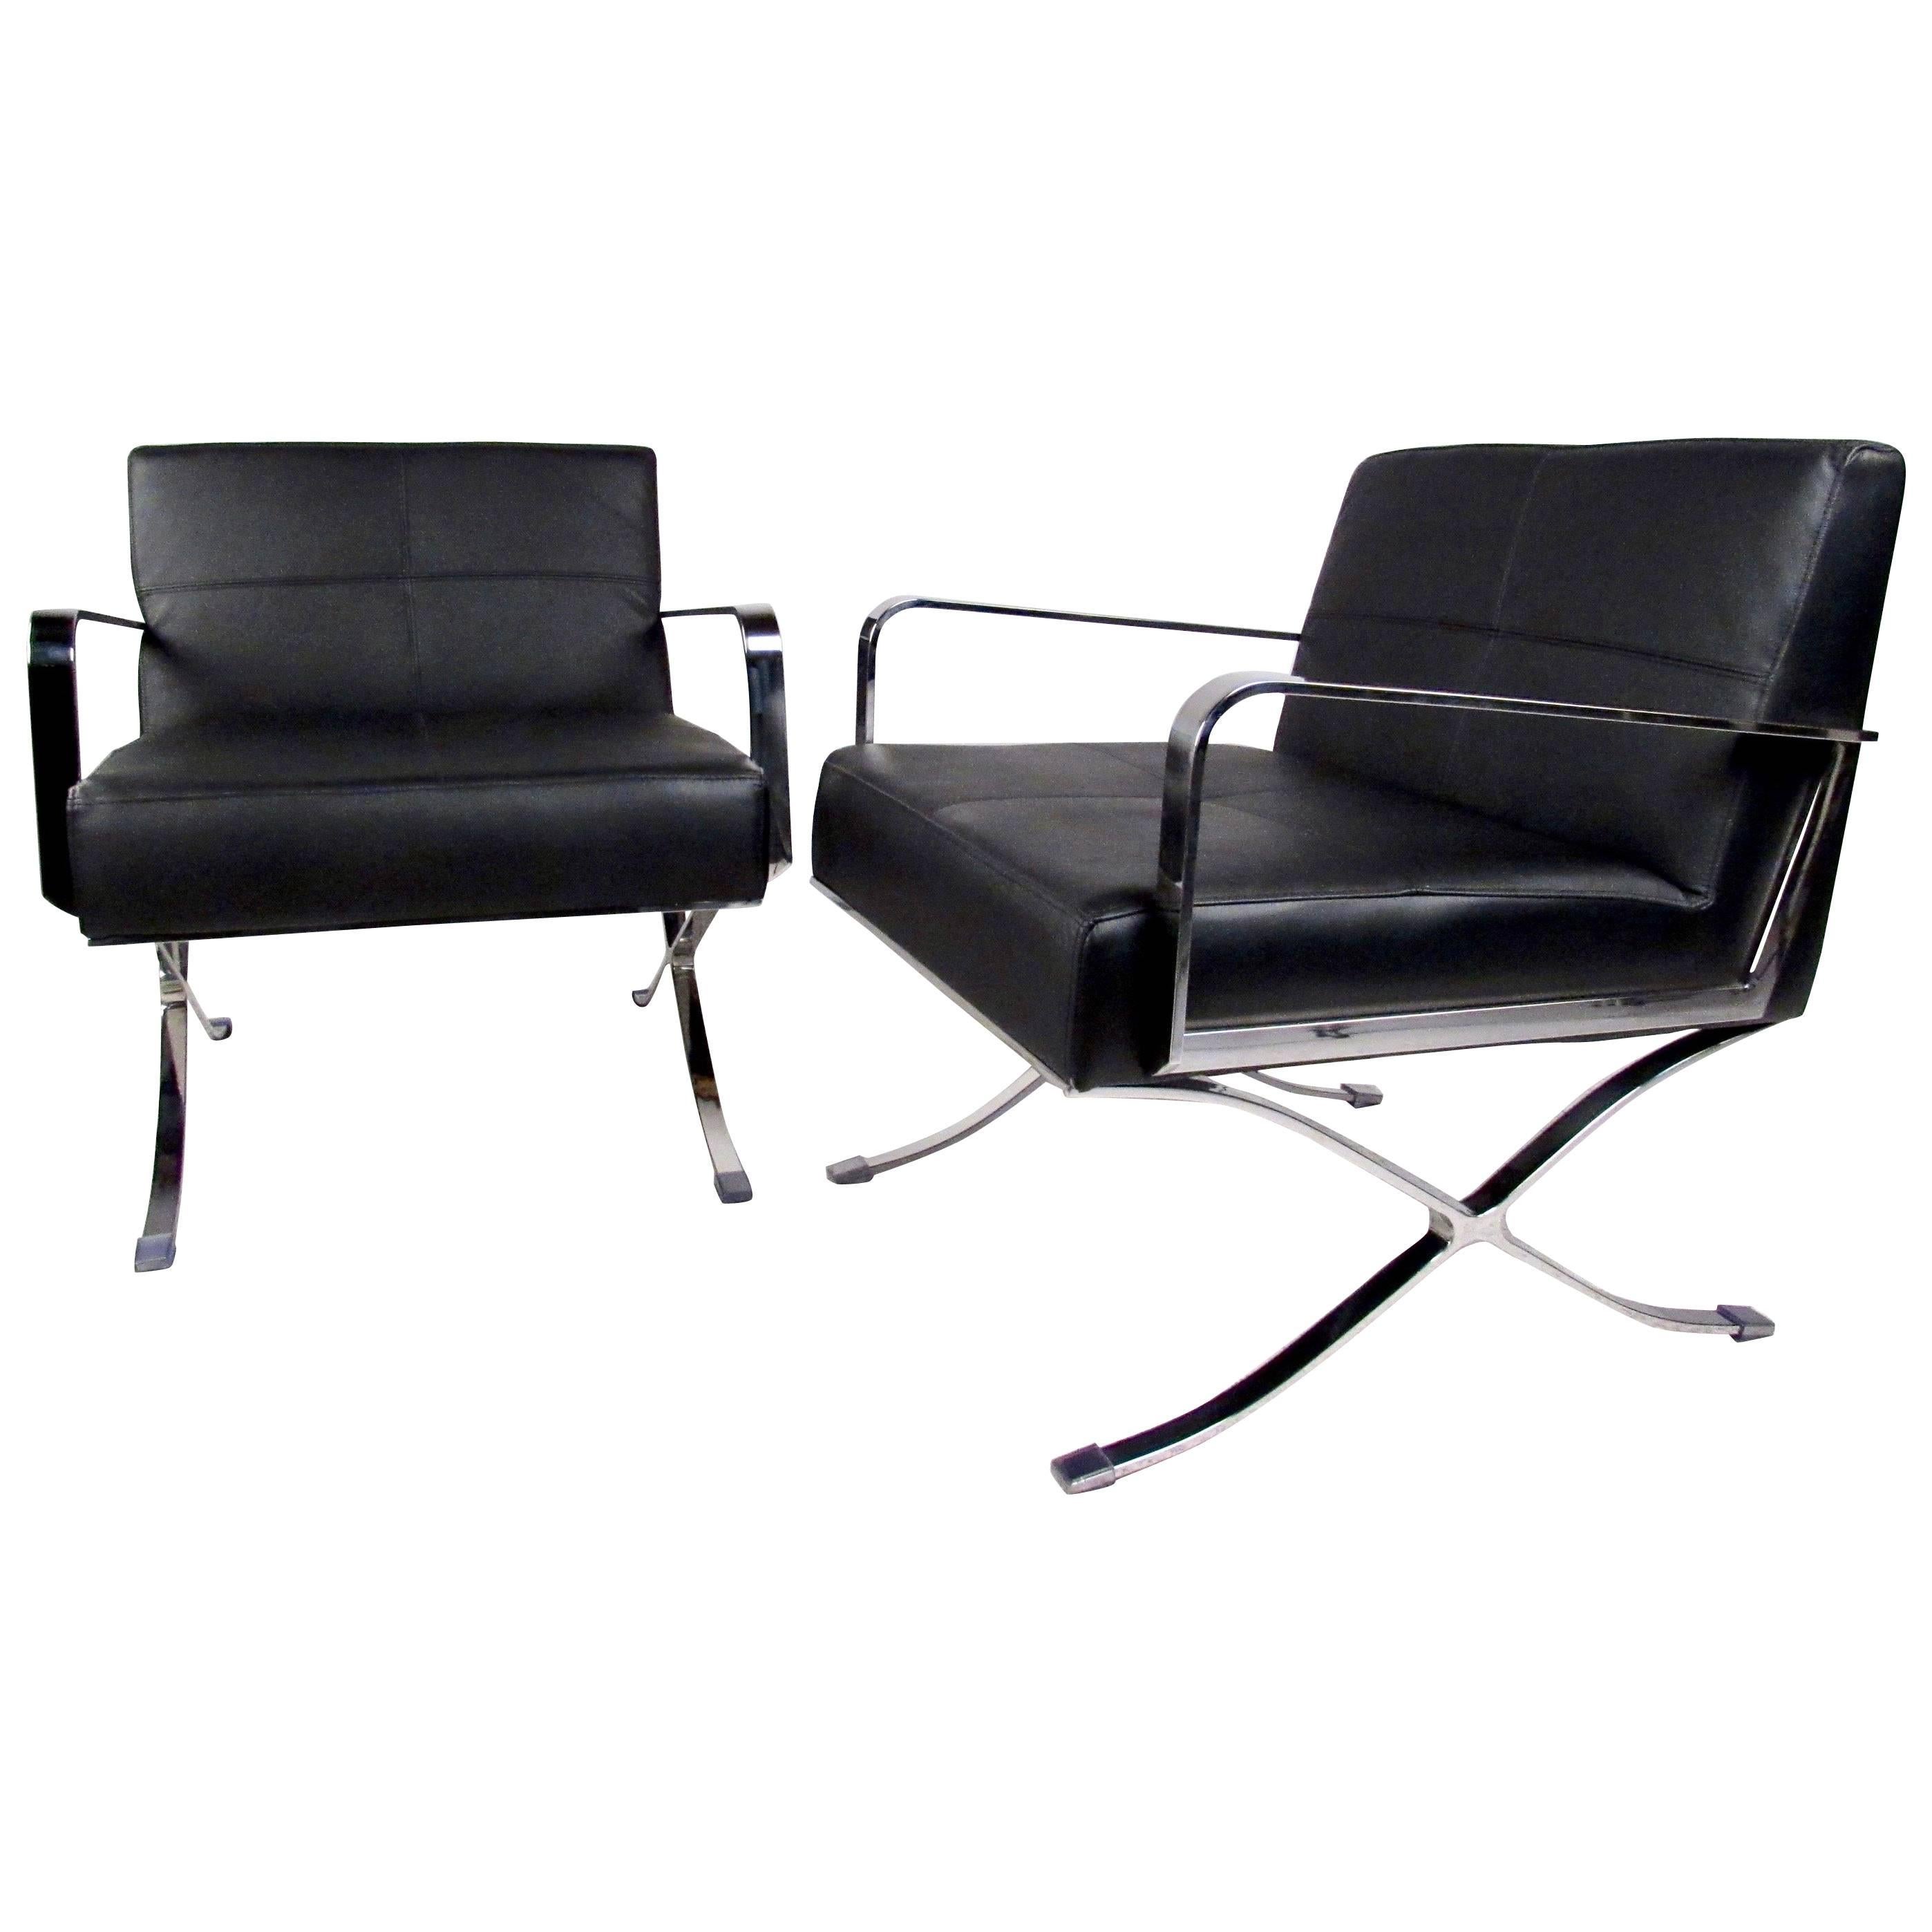 Pair of Modern Club Chairs with X Frame Base For Sale